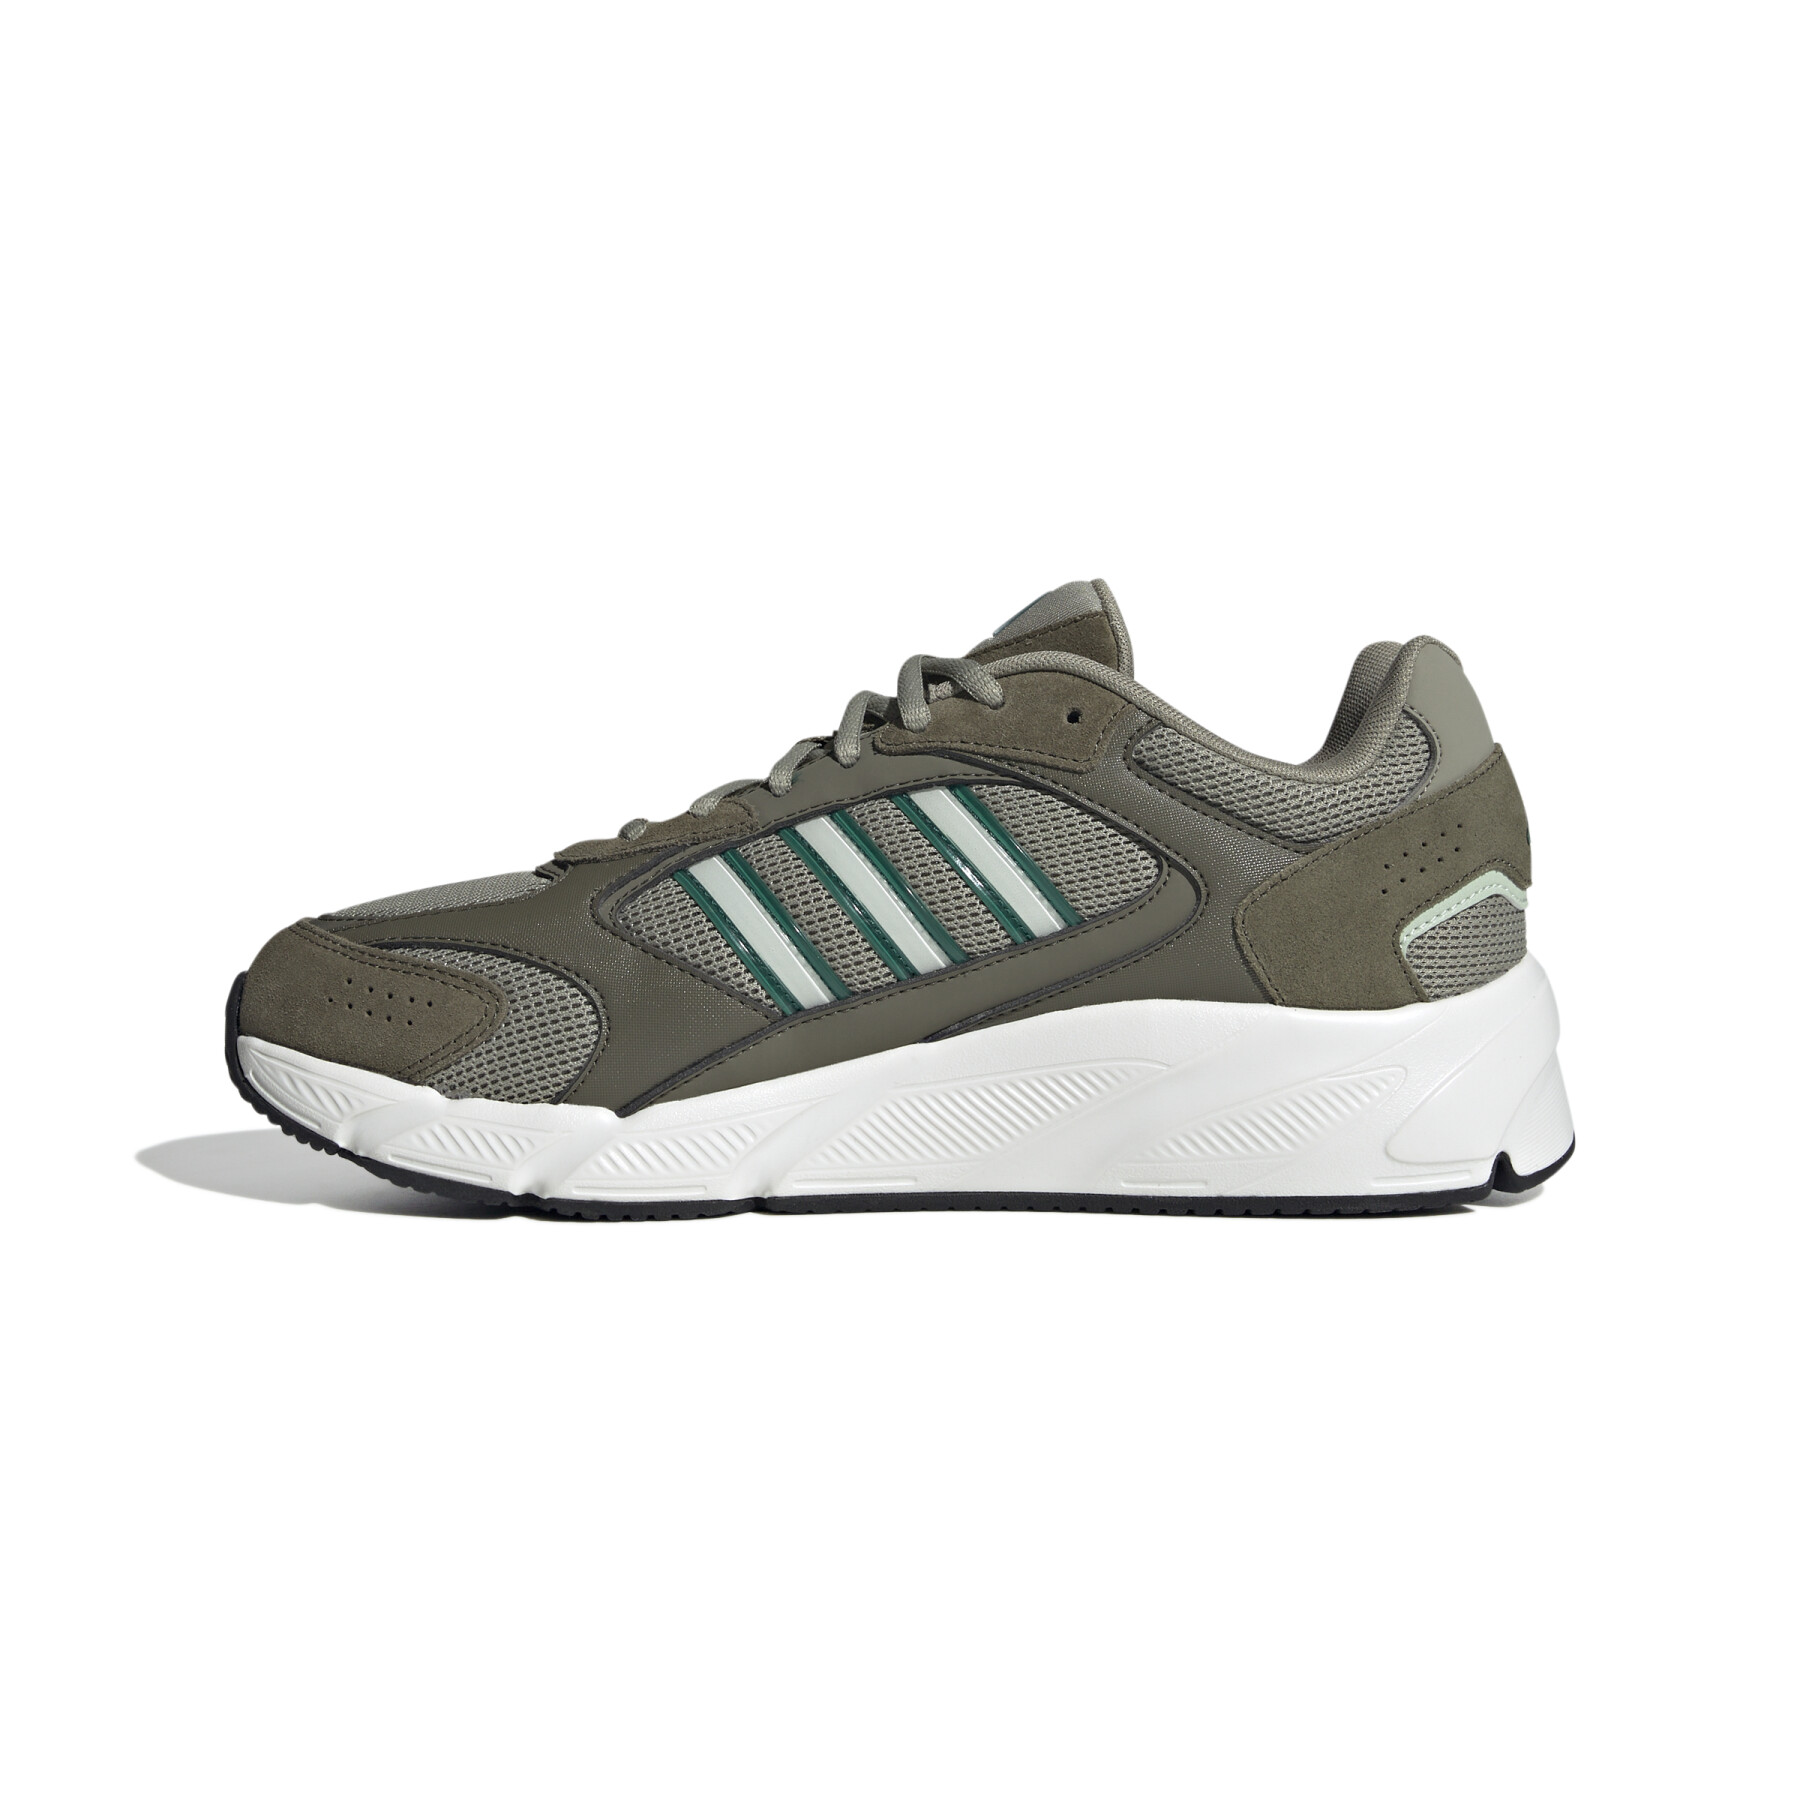 Sneakers adidas Crazychaos 2000